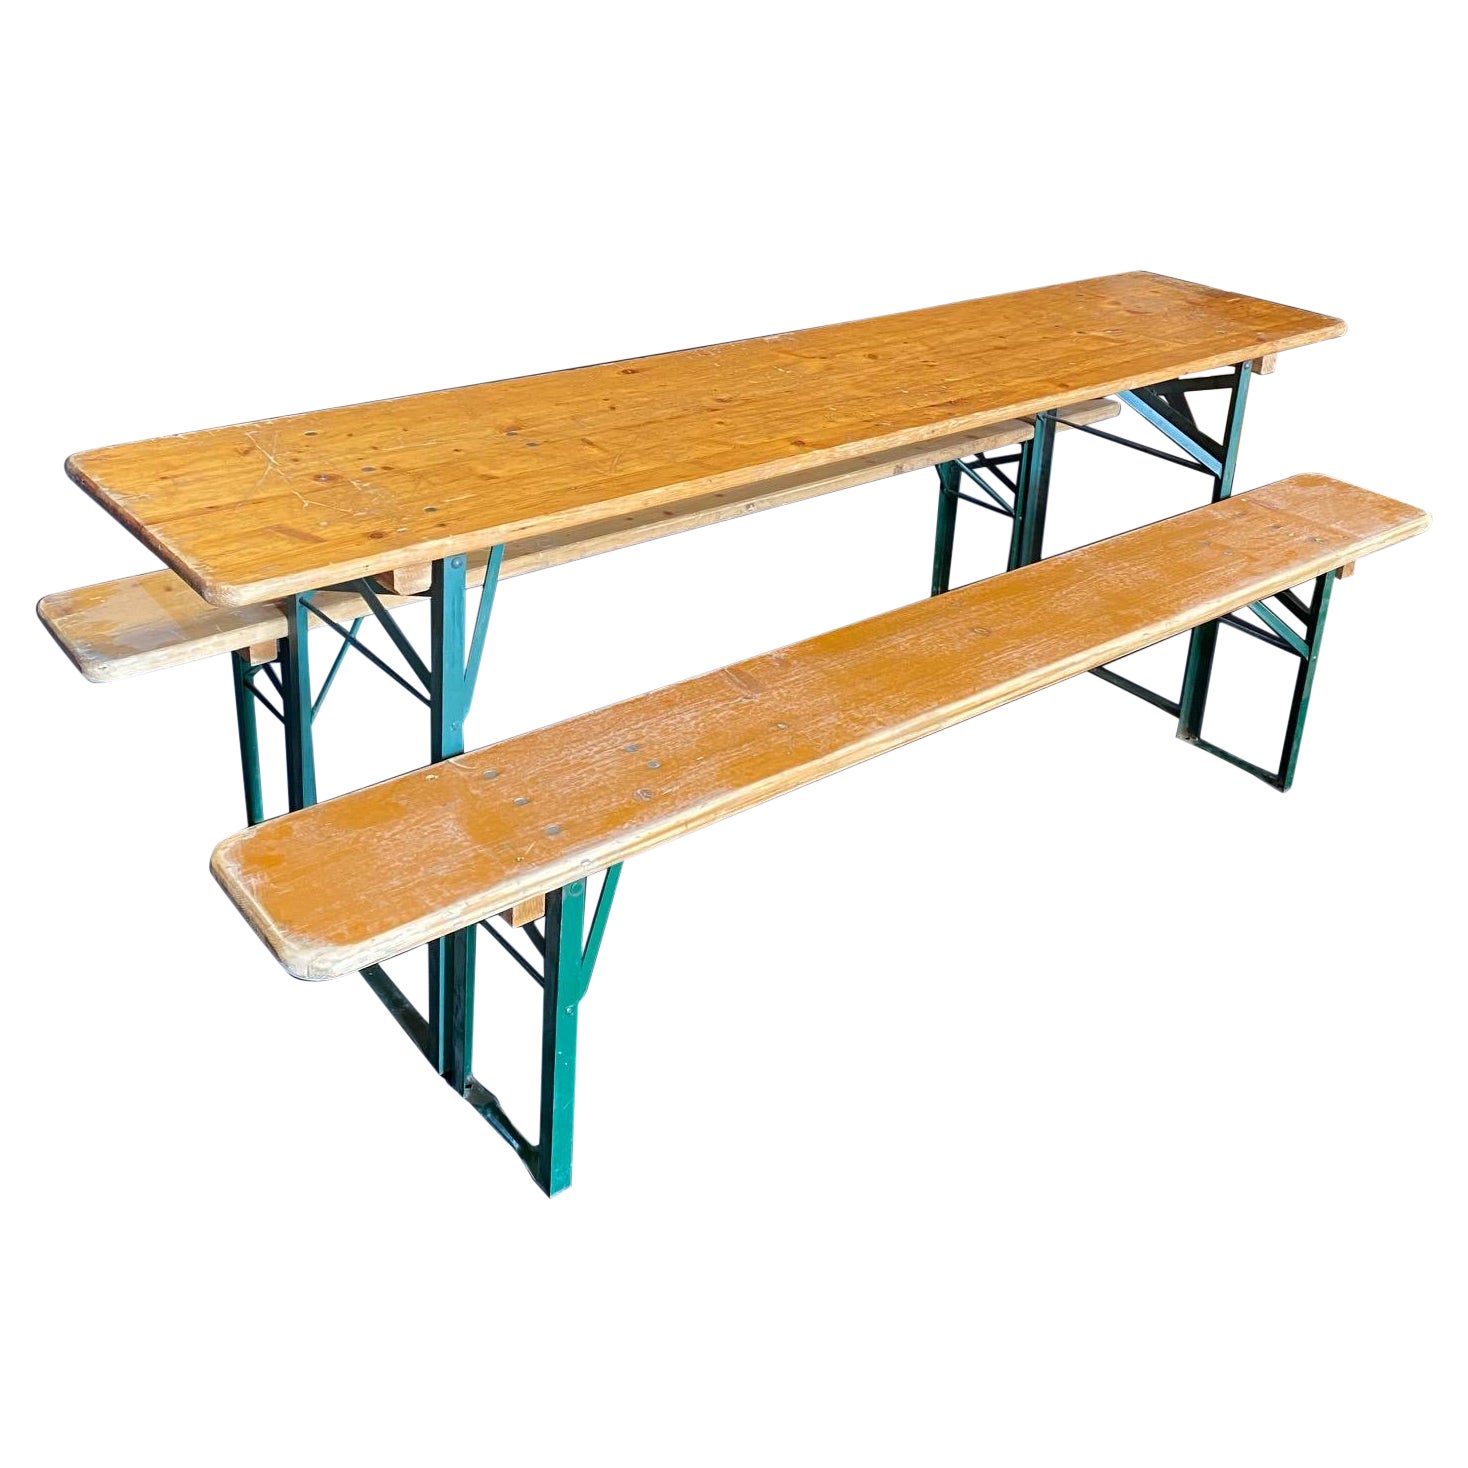 Fun Authentic Vintage Collapsible German Beer Garden Table and Bench Set For Sale